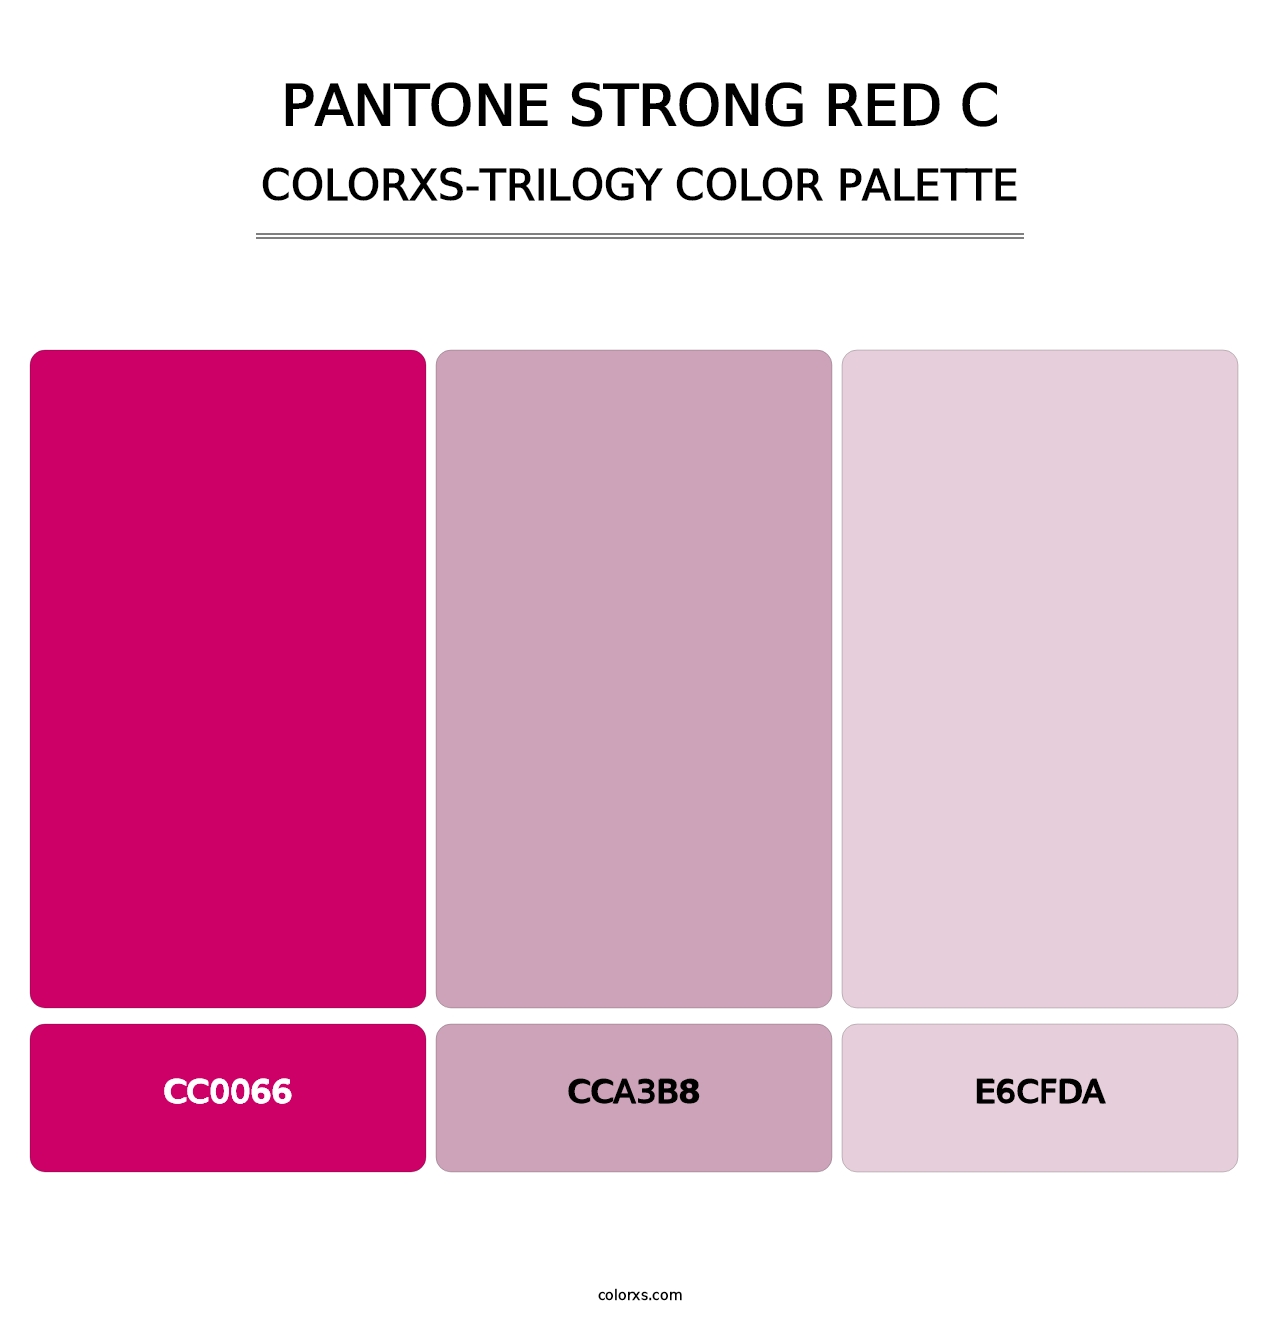 PANTONE Strong Red C - Colorxs Trilogy Palette